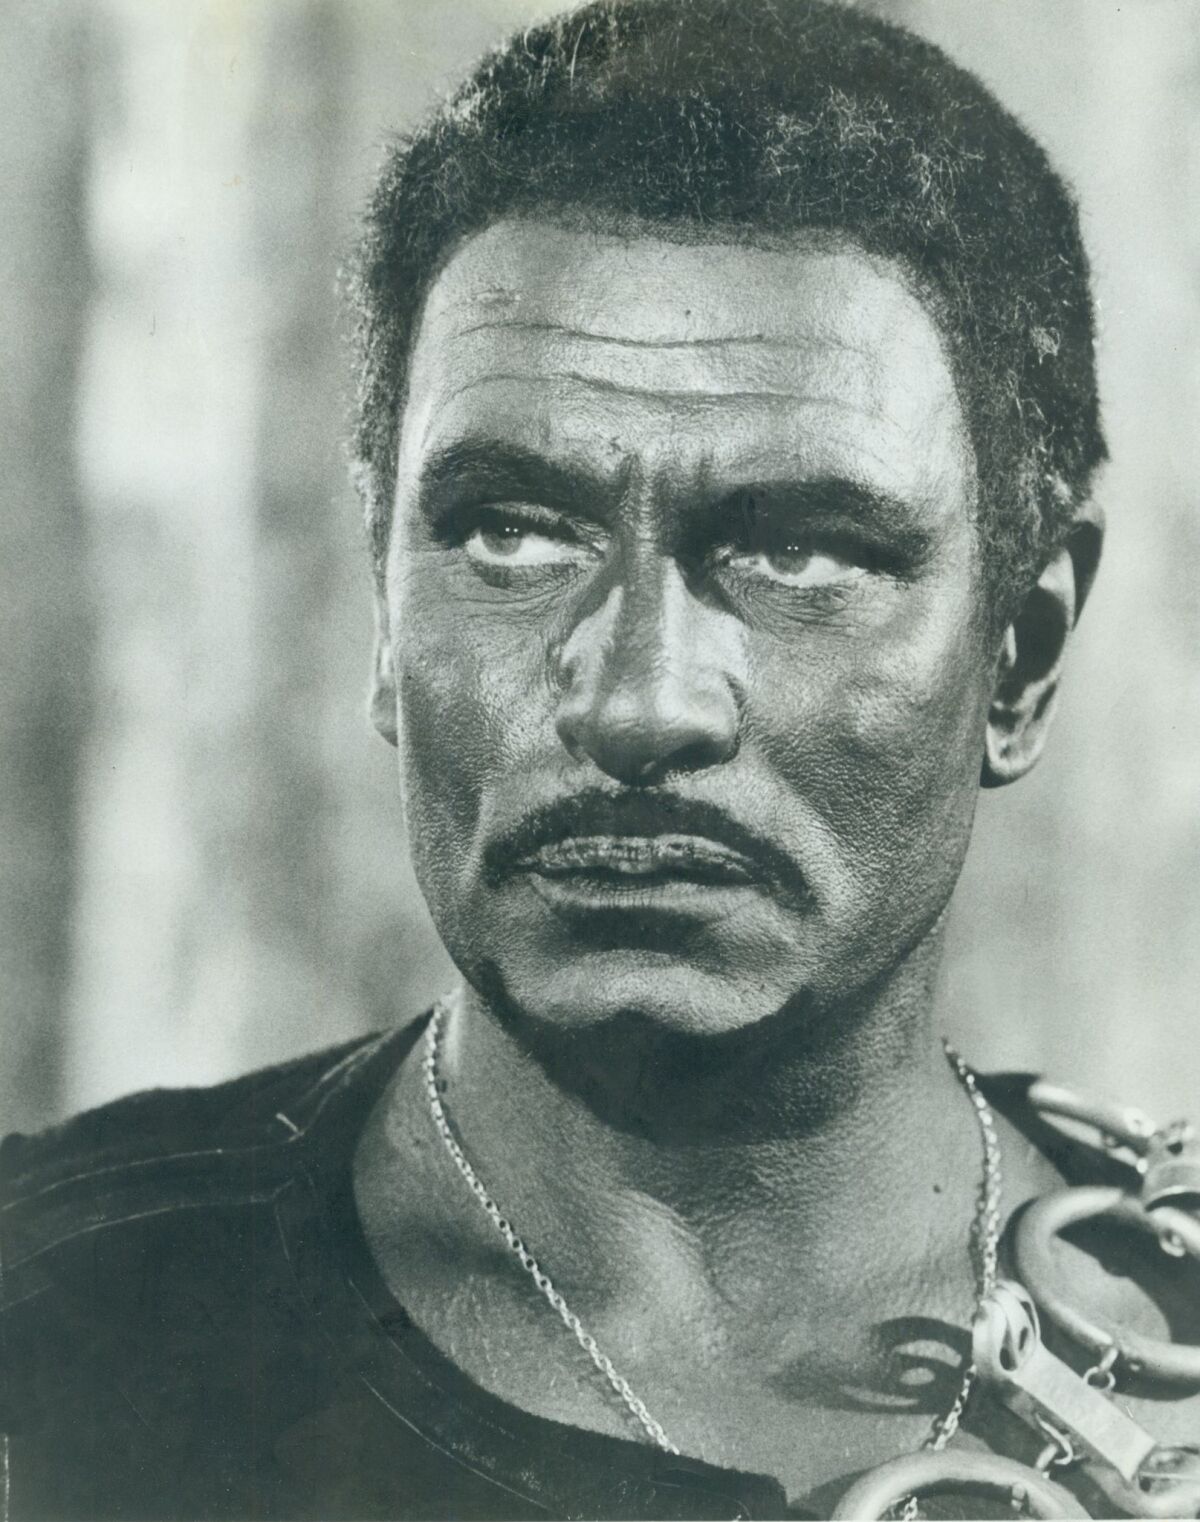 Laurence Olivier portrays Othello in blackface in the 1965 film. (Los Angeles Times)